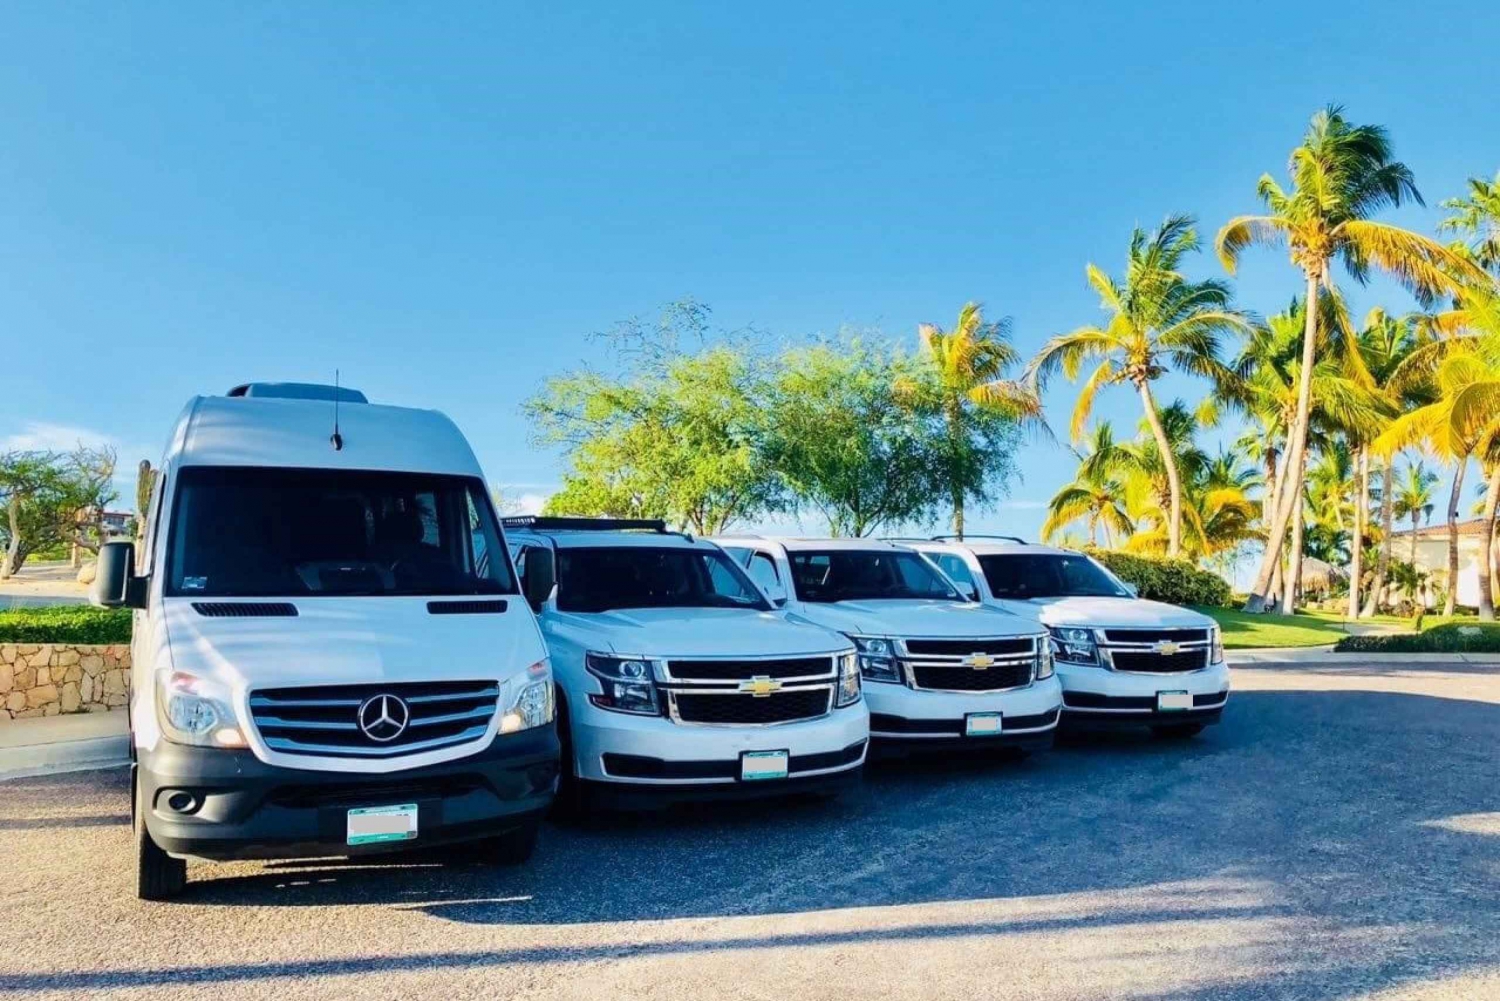 Grand Bahama Airport: One Way Private Transfer to Freeport